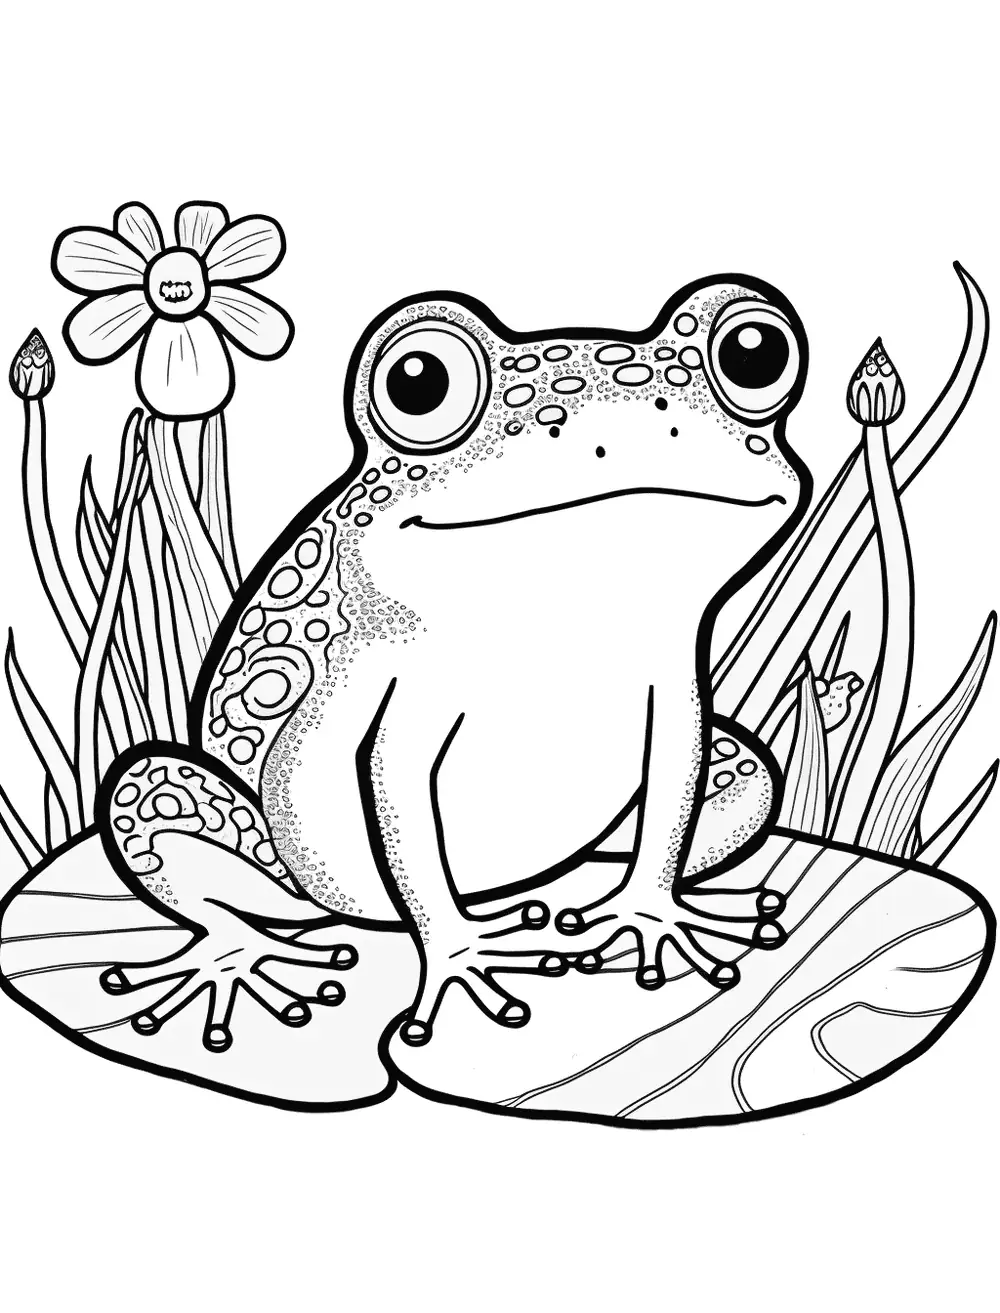 Frog And Caterpillar Coloring Page - A frog and a caterpillar, with the caterpillar crawling on the frog's back